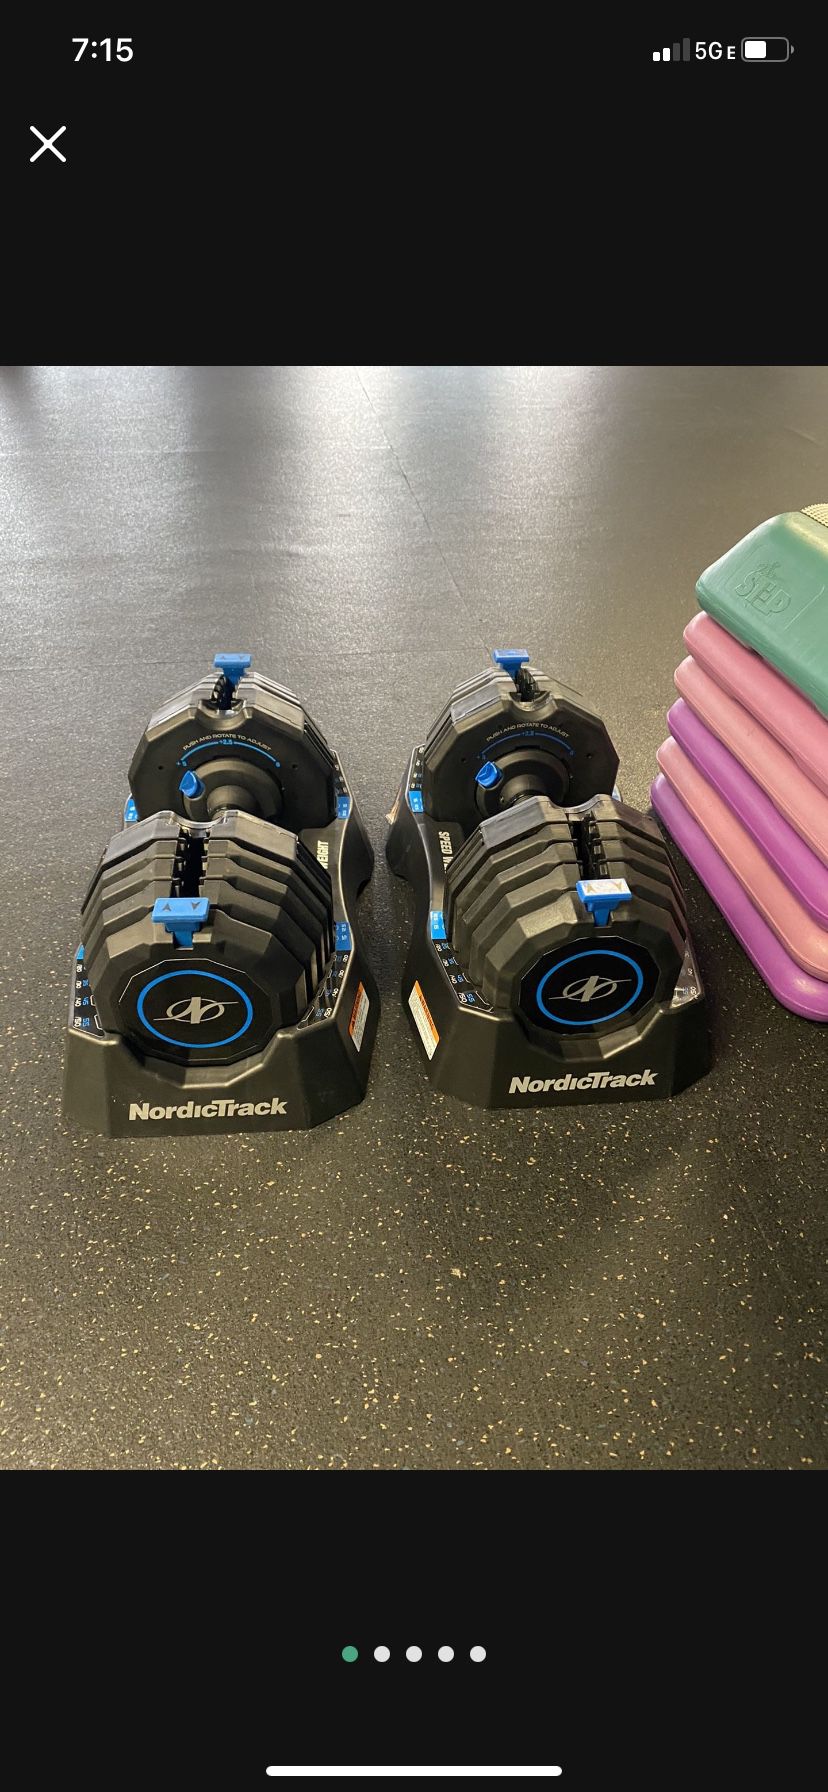 $199 Today Only!!These retail Over $350.00 Nordictrack Adjustable (1-pair)Dumbbells 55lbs each  Brand new